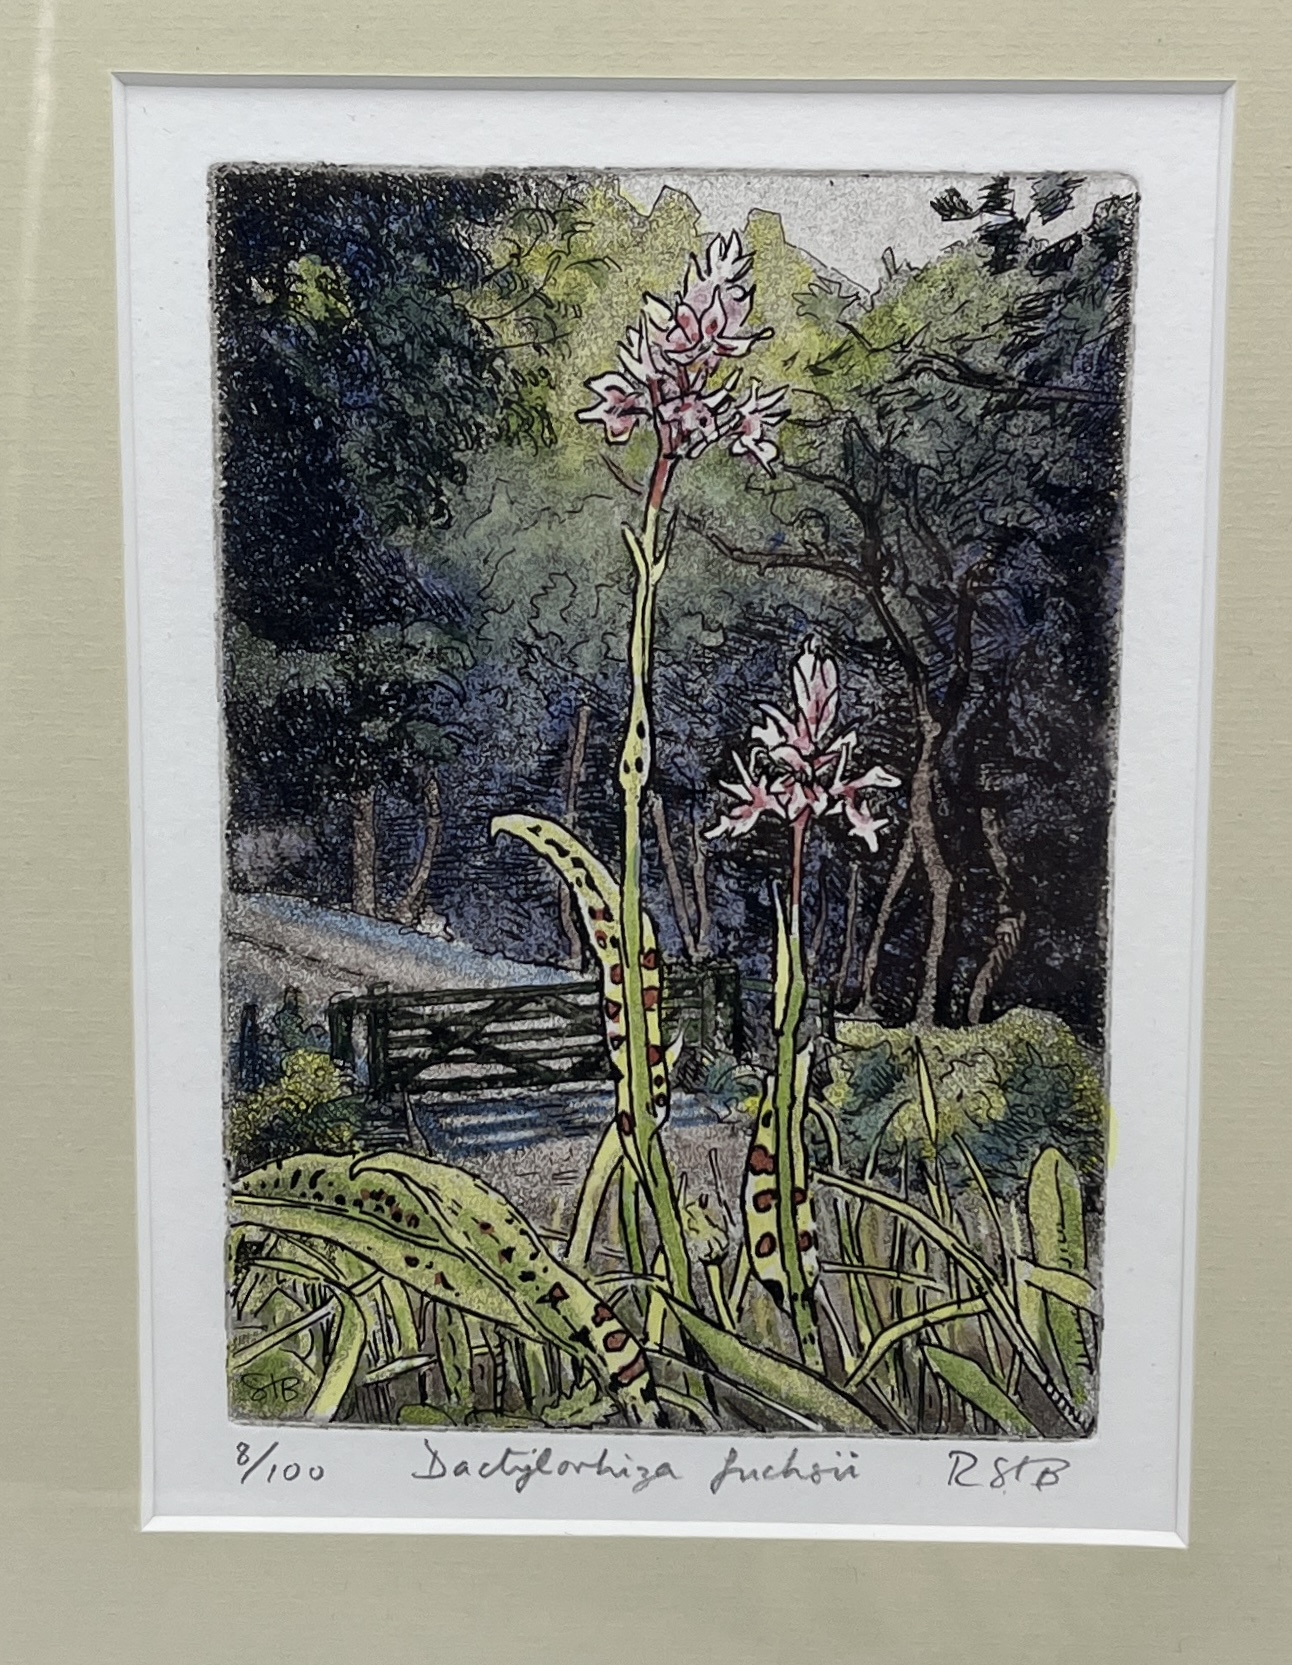 Two limited edition prints by Roger St Barbe, "Dactylorhiza Fuchsia" etched aquatint signed and - Image 3 of 3